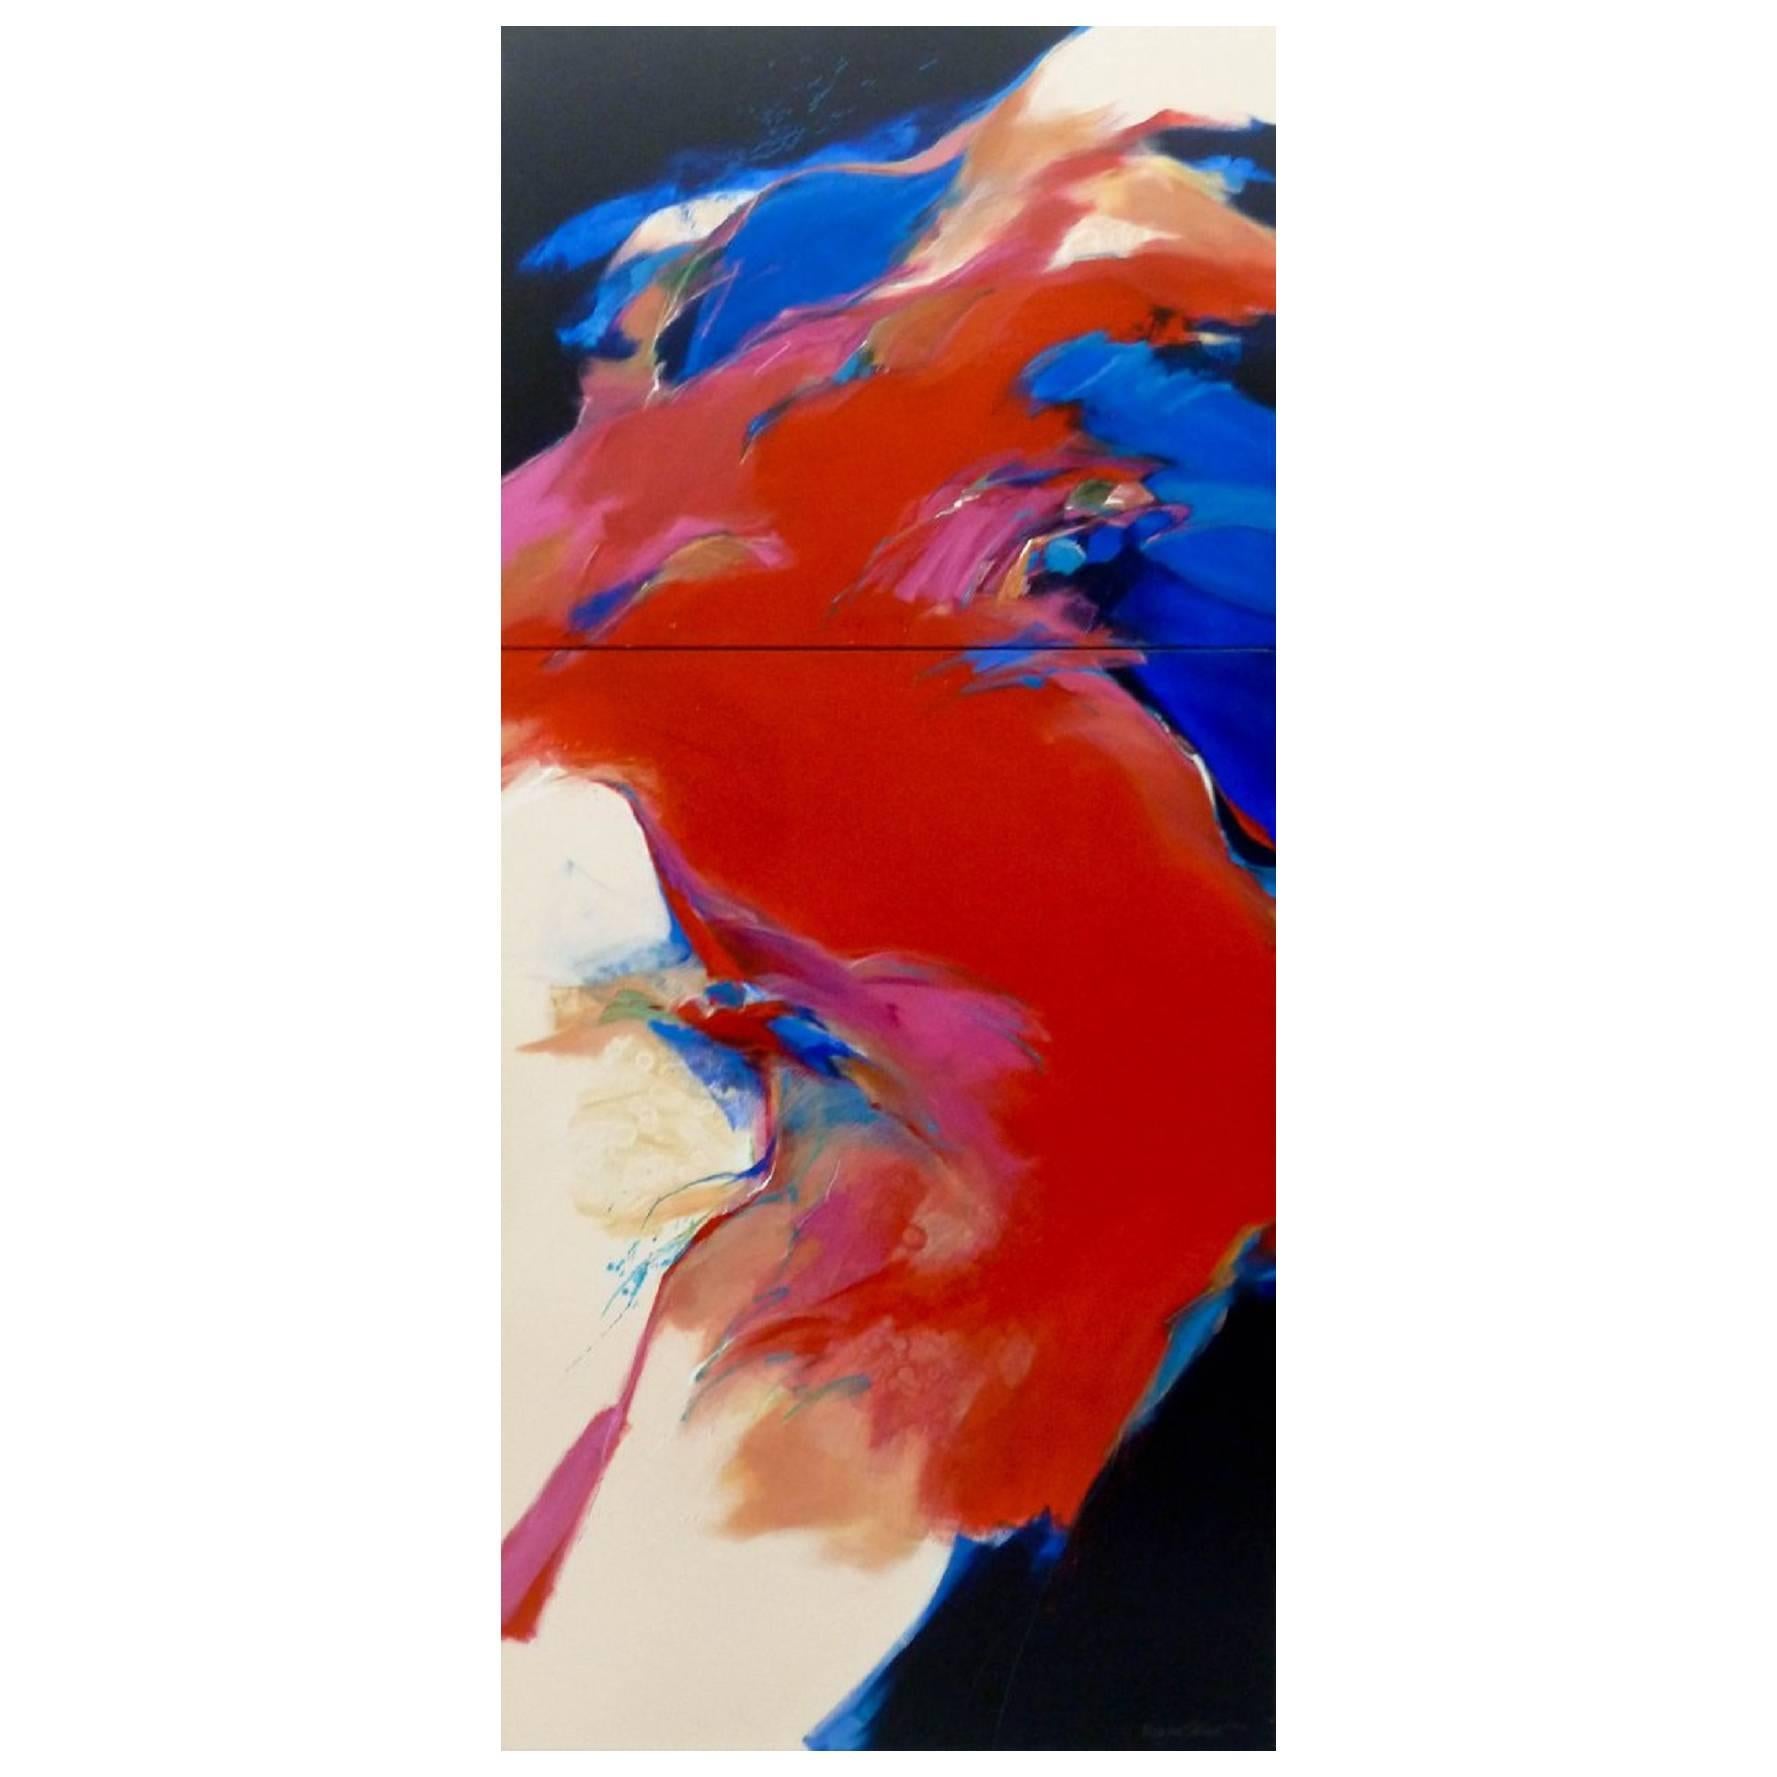 Monumental Acrylic on Canvas Painting 'Diptych' by Mary Jane Schmidt "Red Wind" For Sale